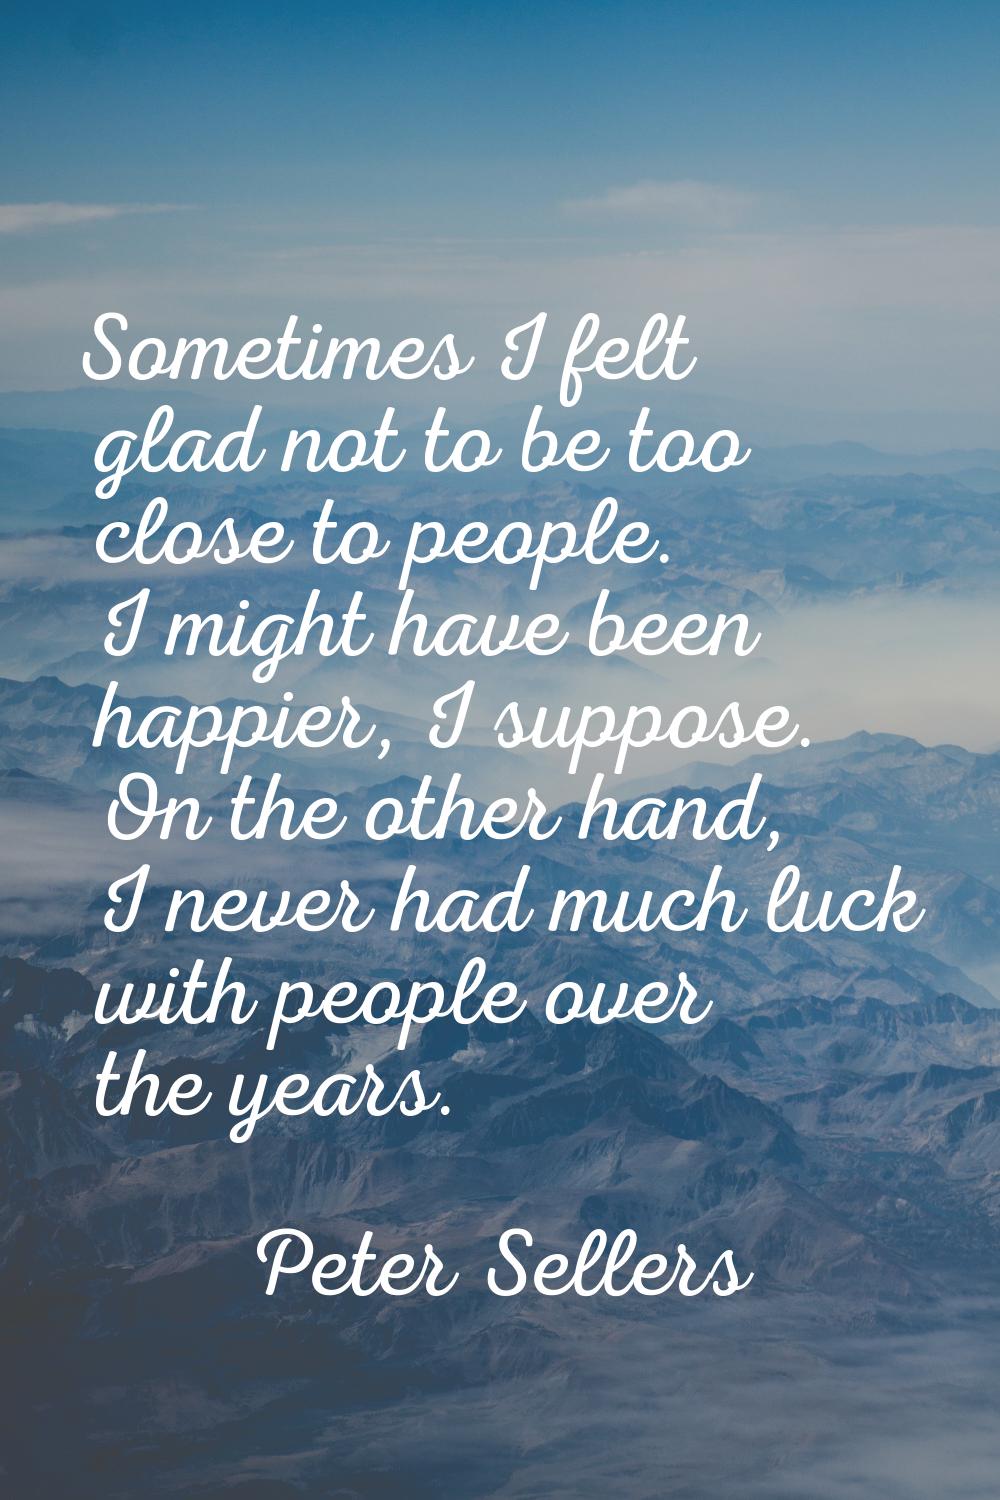 Sometimes I felt glad not to be too close to people. I might have been happier, I suppose. On the o